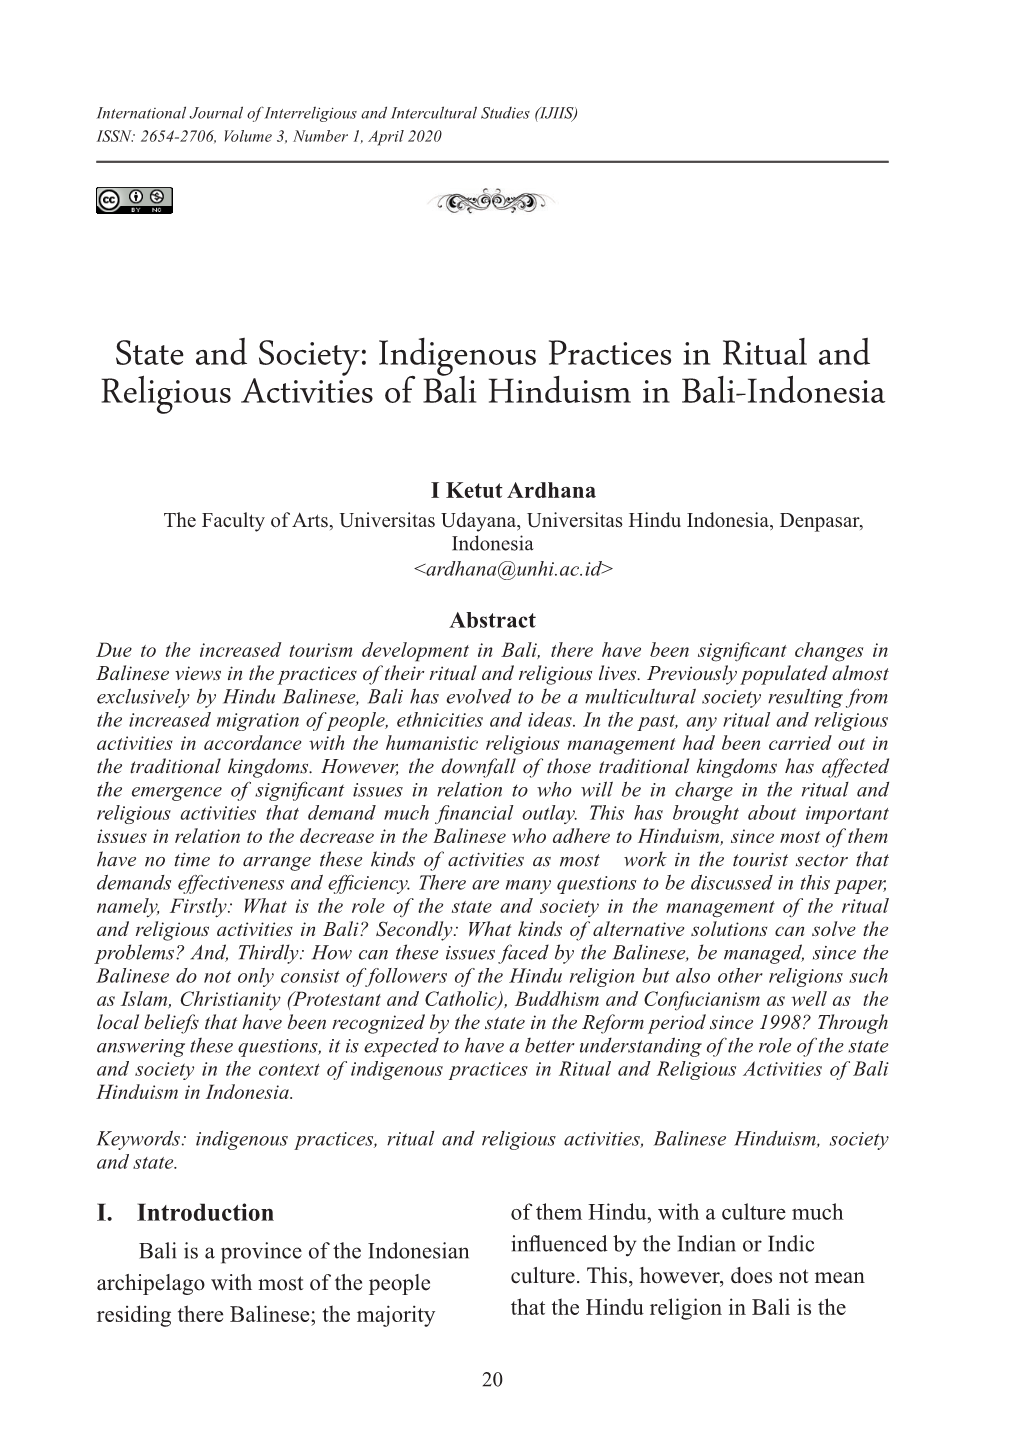 Indigenous Practices in Ritual and Religious Activities of Bali Hinduism in Bali-Indonesia